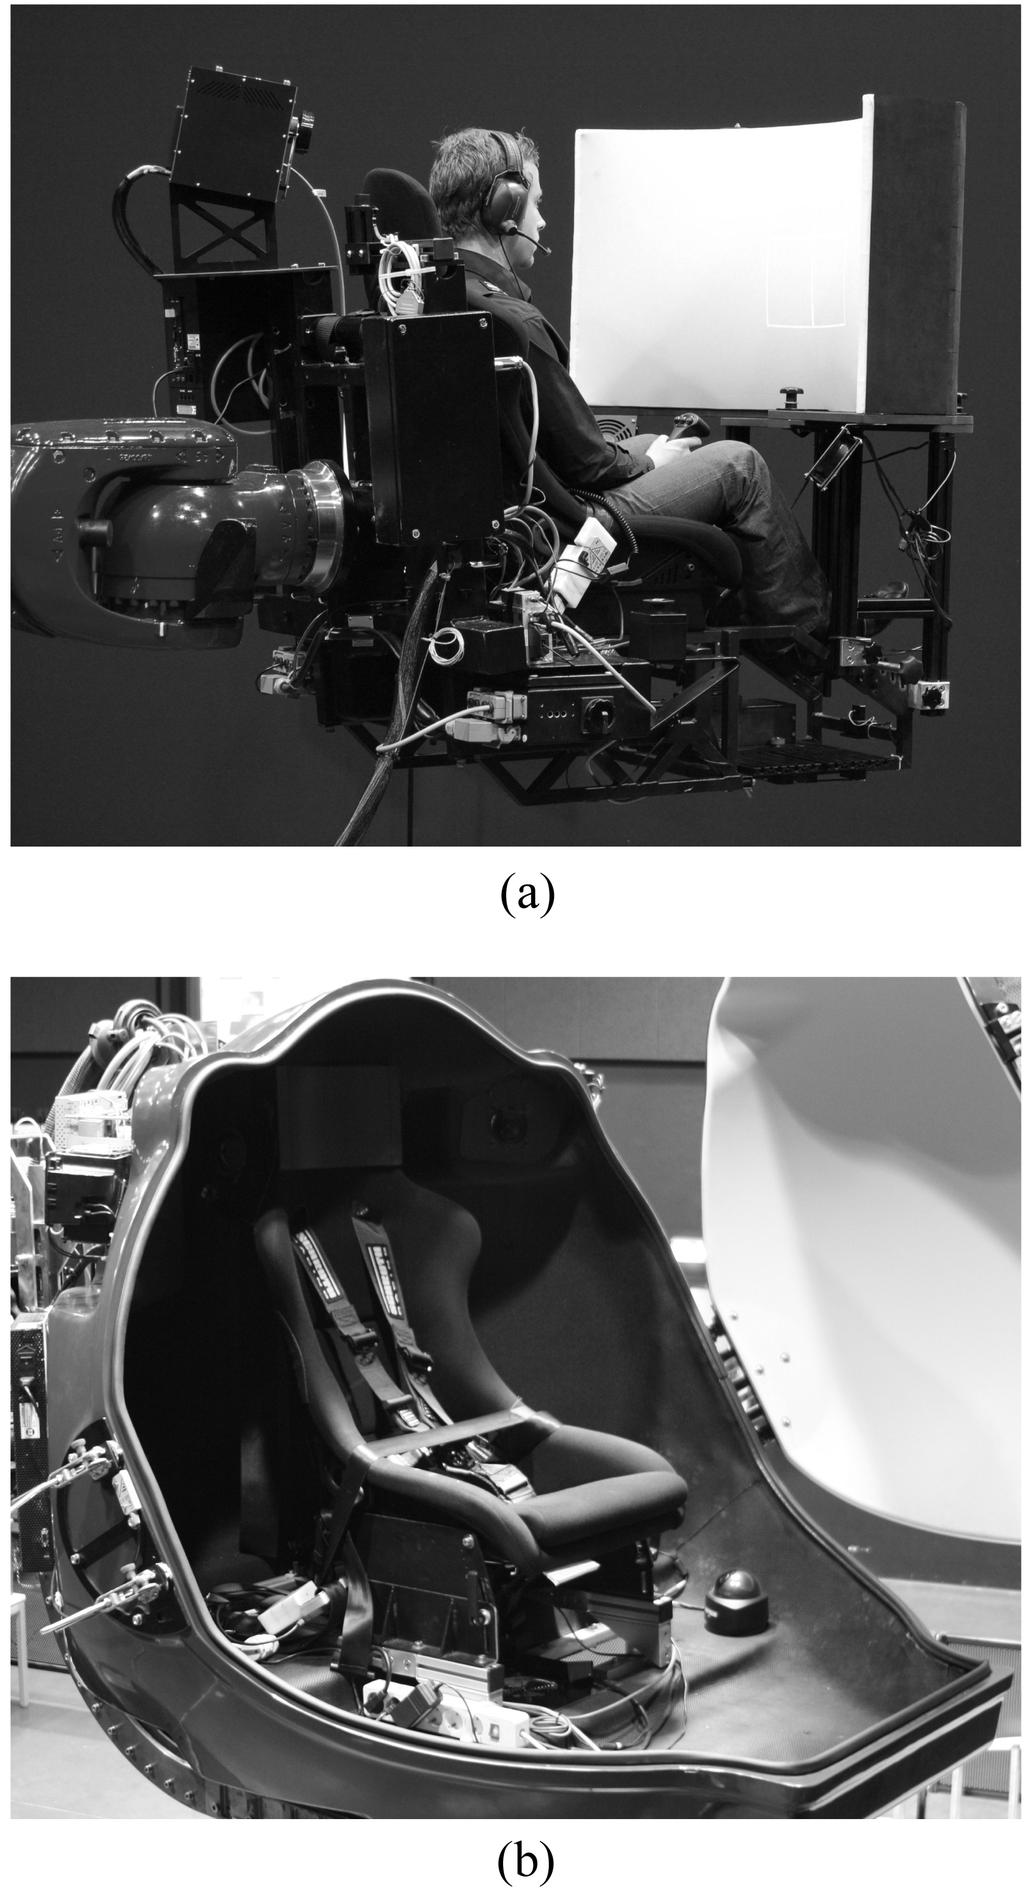 The MPI CyberMotion Simulator: A Novel Research Platform to Investigate Human Control Behavior coupled, and therefore, the motion envelope is extended compared to traditional Stewart platforms.